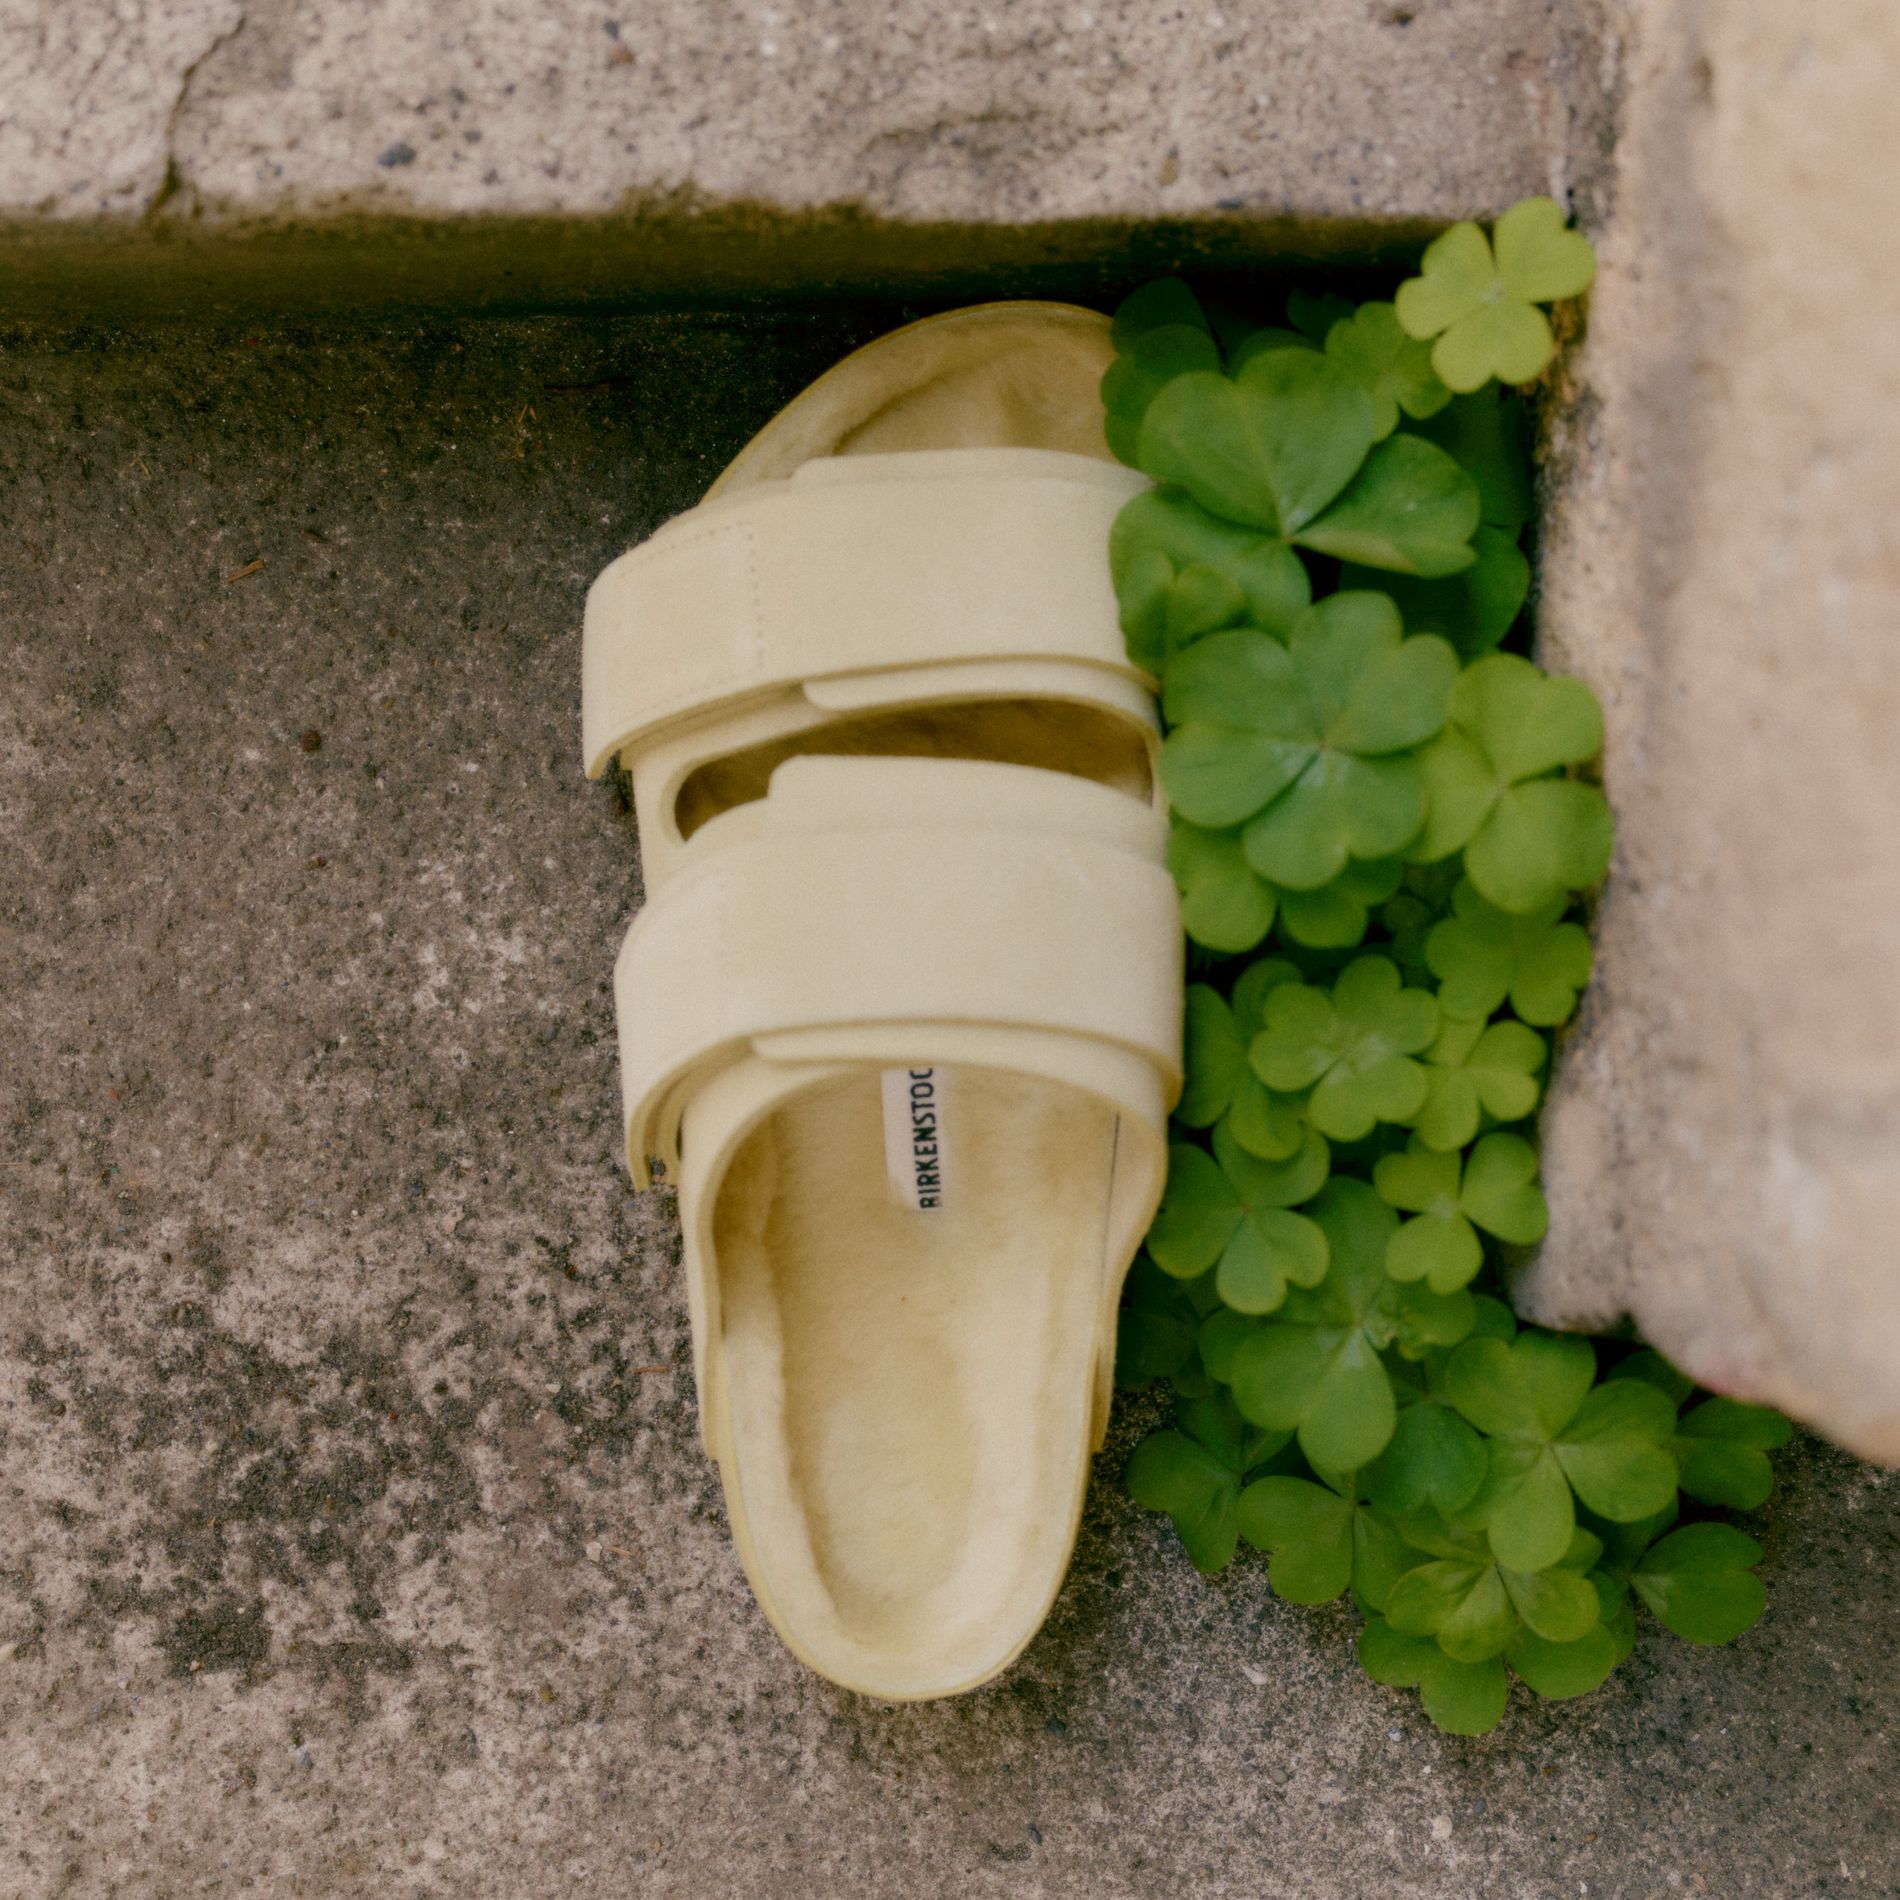 Birkenstock takes a bigger step into Scandinavia with its